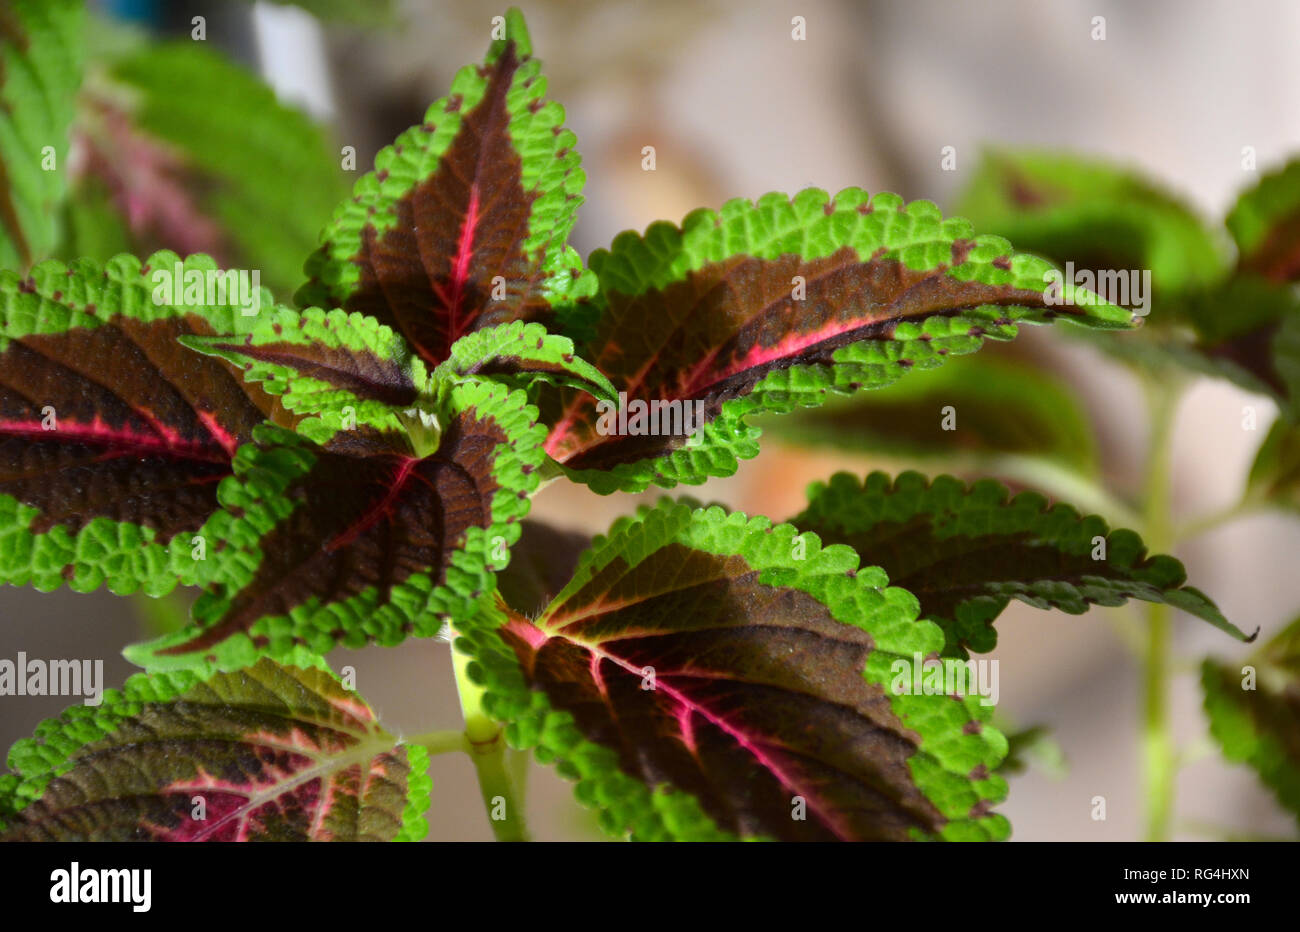 Houseplant coleus or colorful nettle indoor. Colorful green and purple Coleus leaves Stock Photo